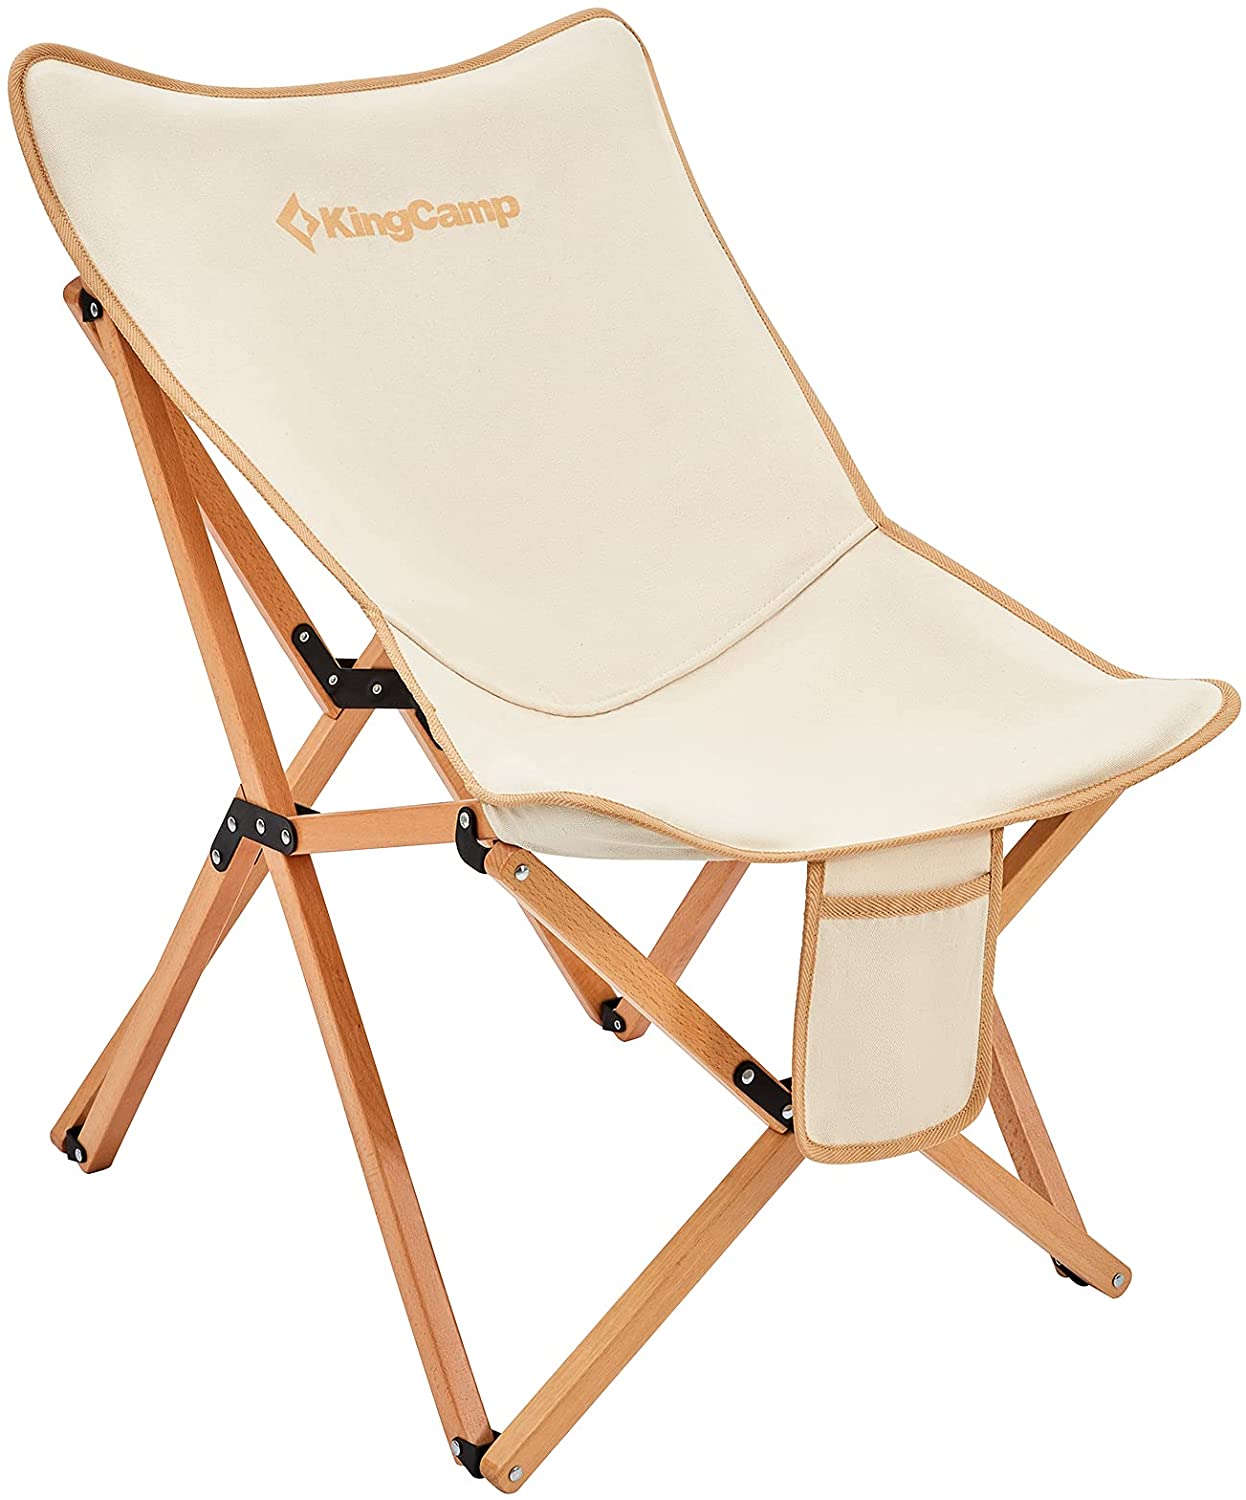 KingCamp Butterfly Chair with Removable Canvas Cover